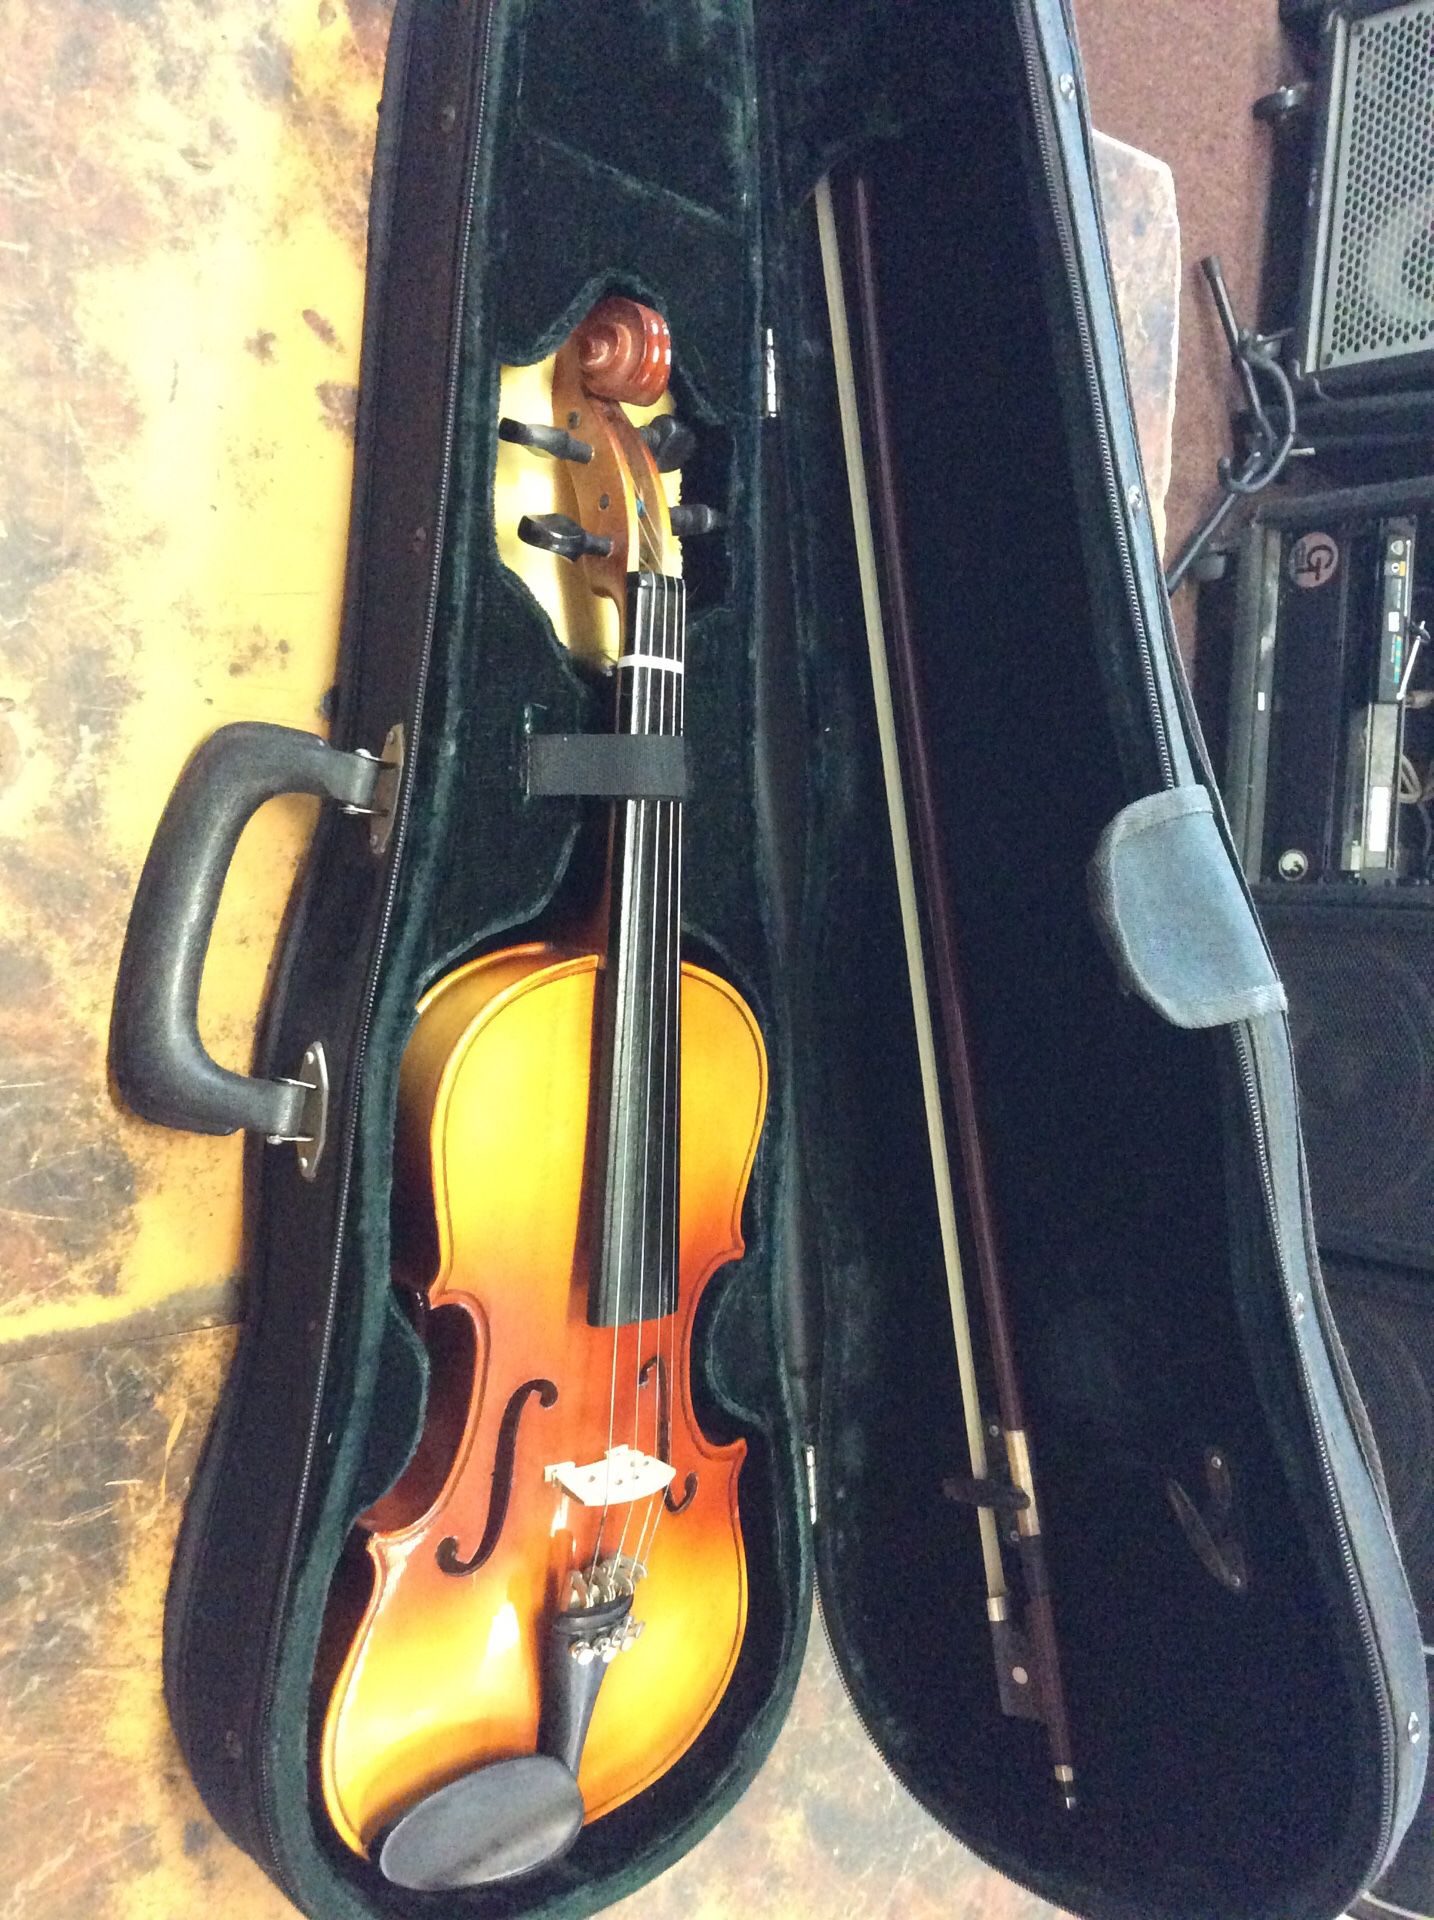 Harmonia VC006 Violin size 1/2 with bow in case